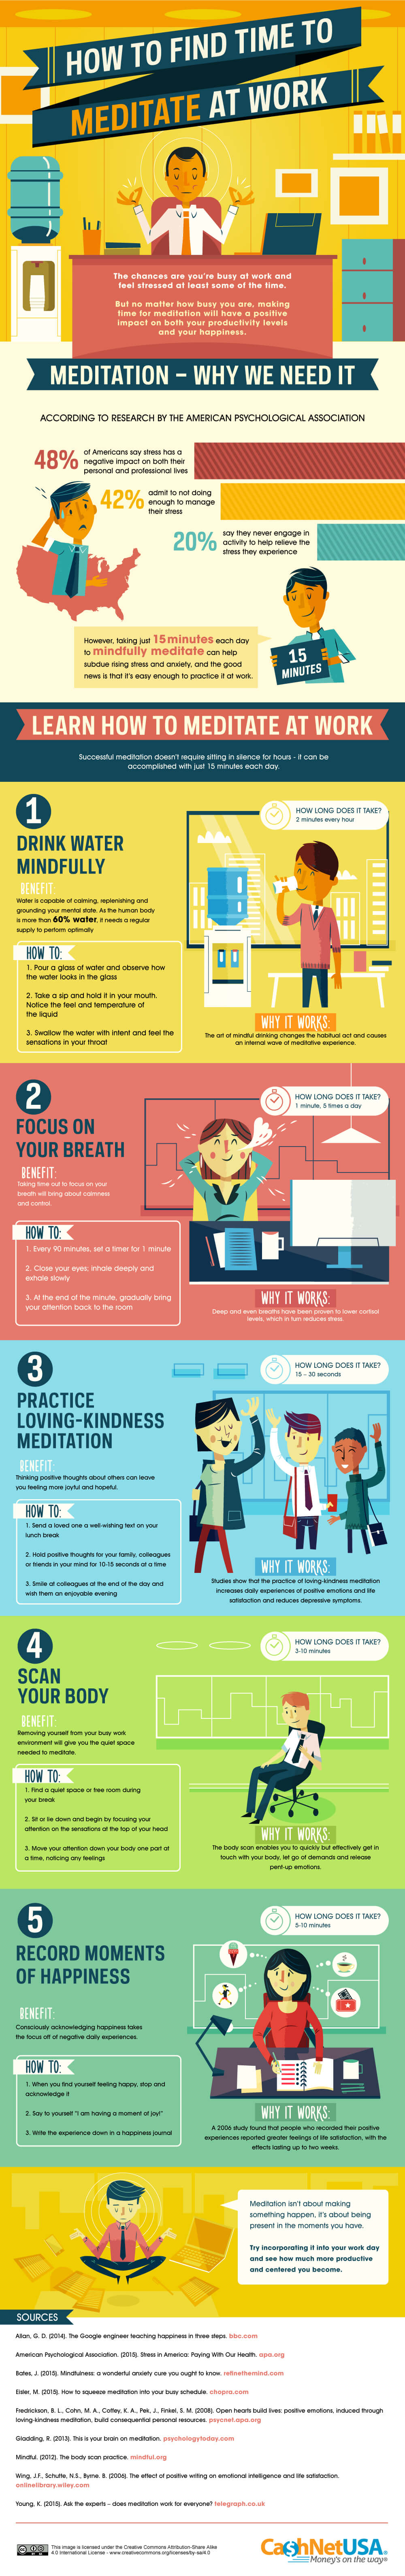 How to Find Time to Meditate at Work 